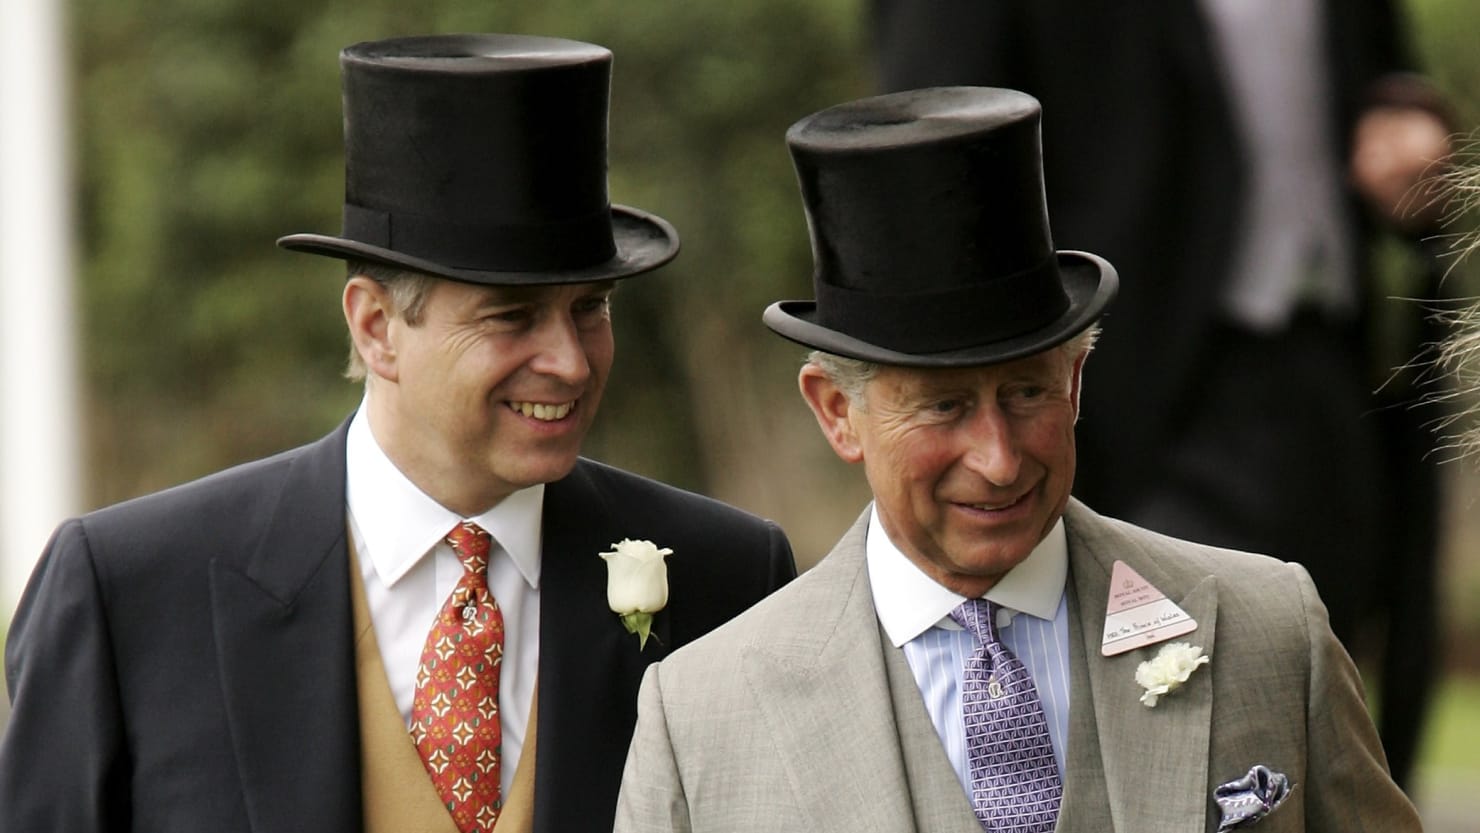 Prince Charles and Prince William were behind Prince Andrew’s royal expulsion